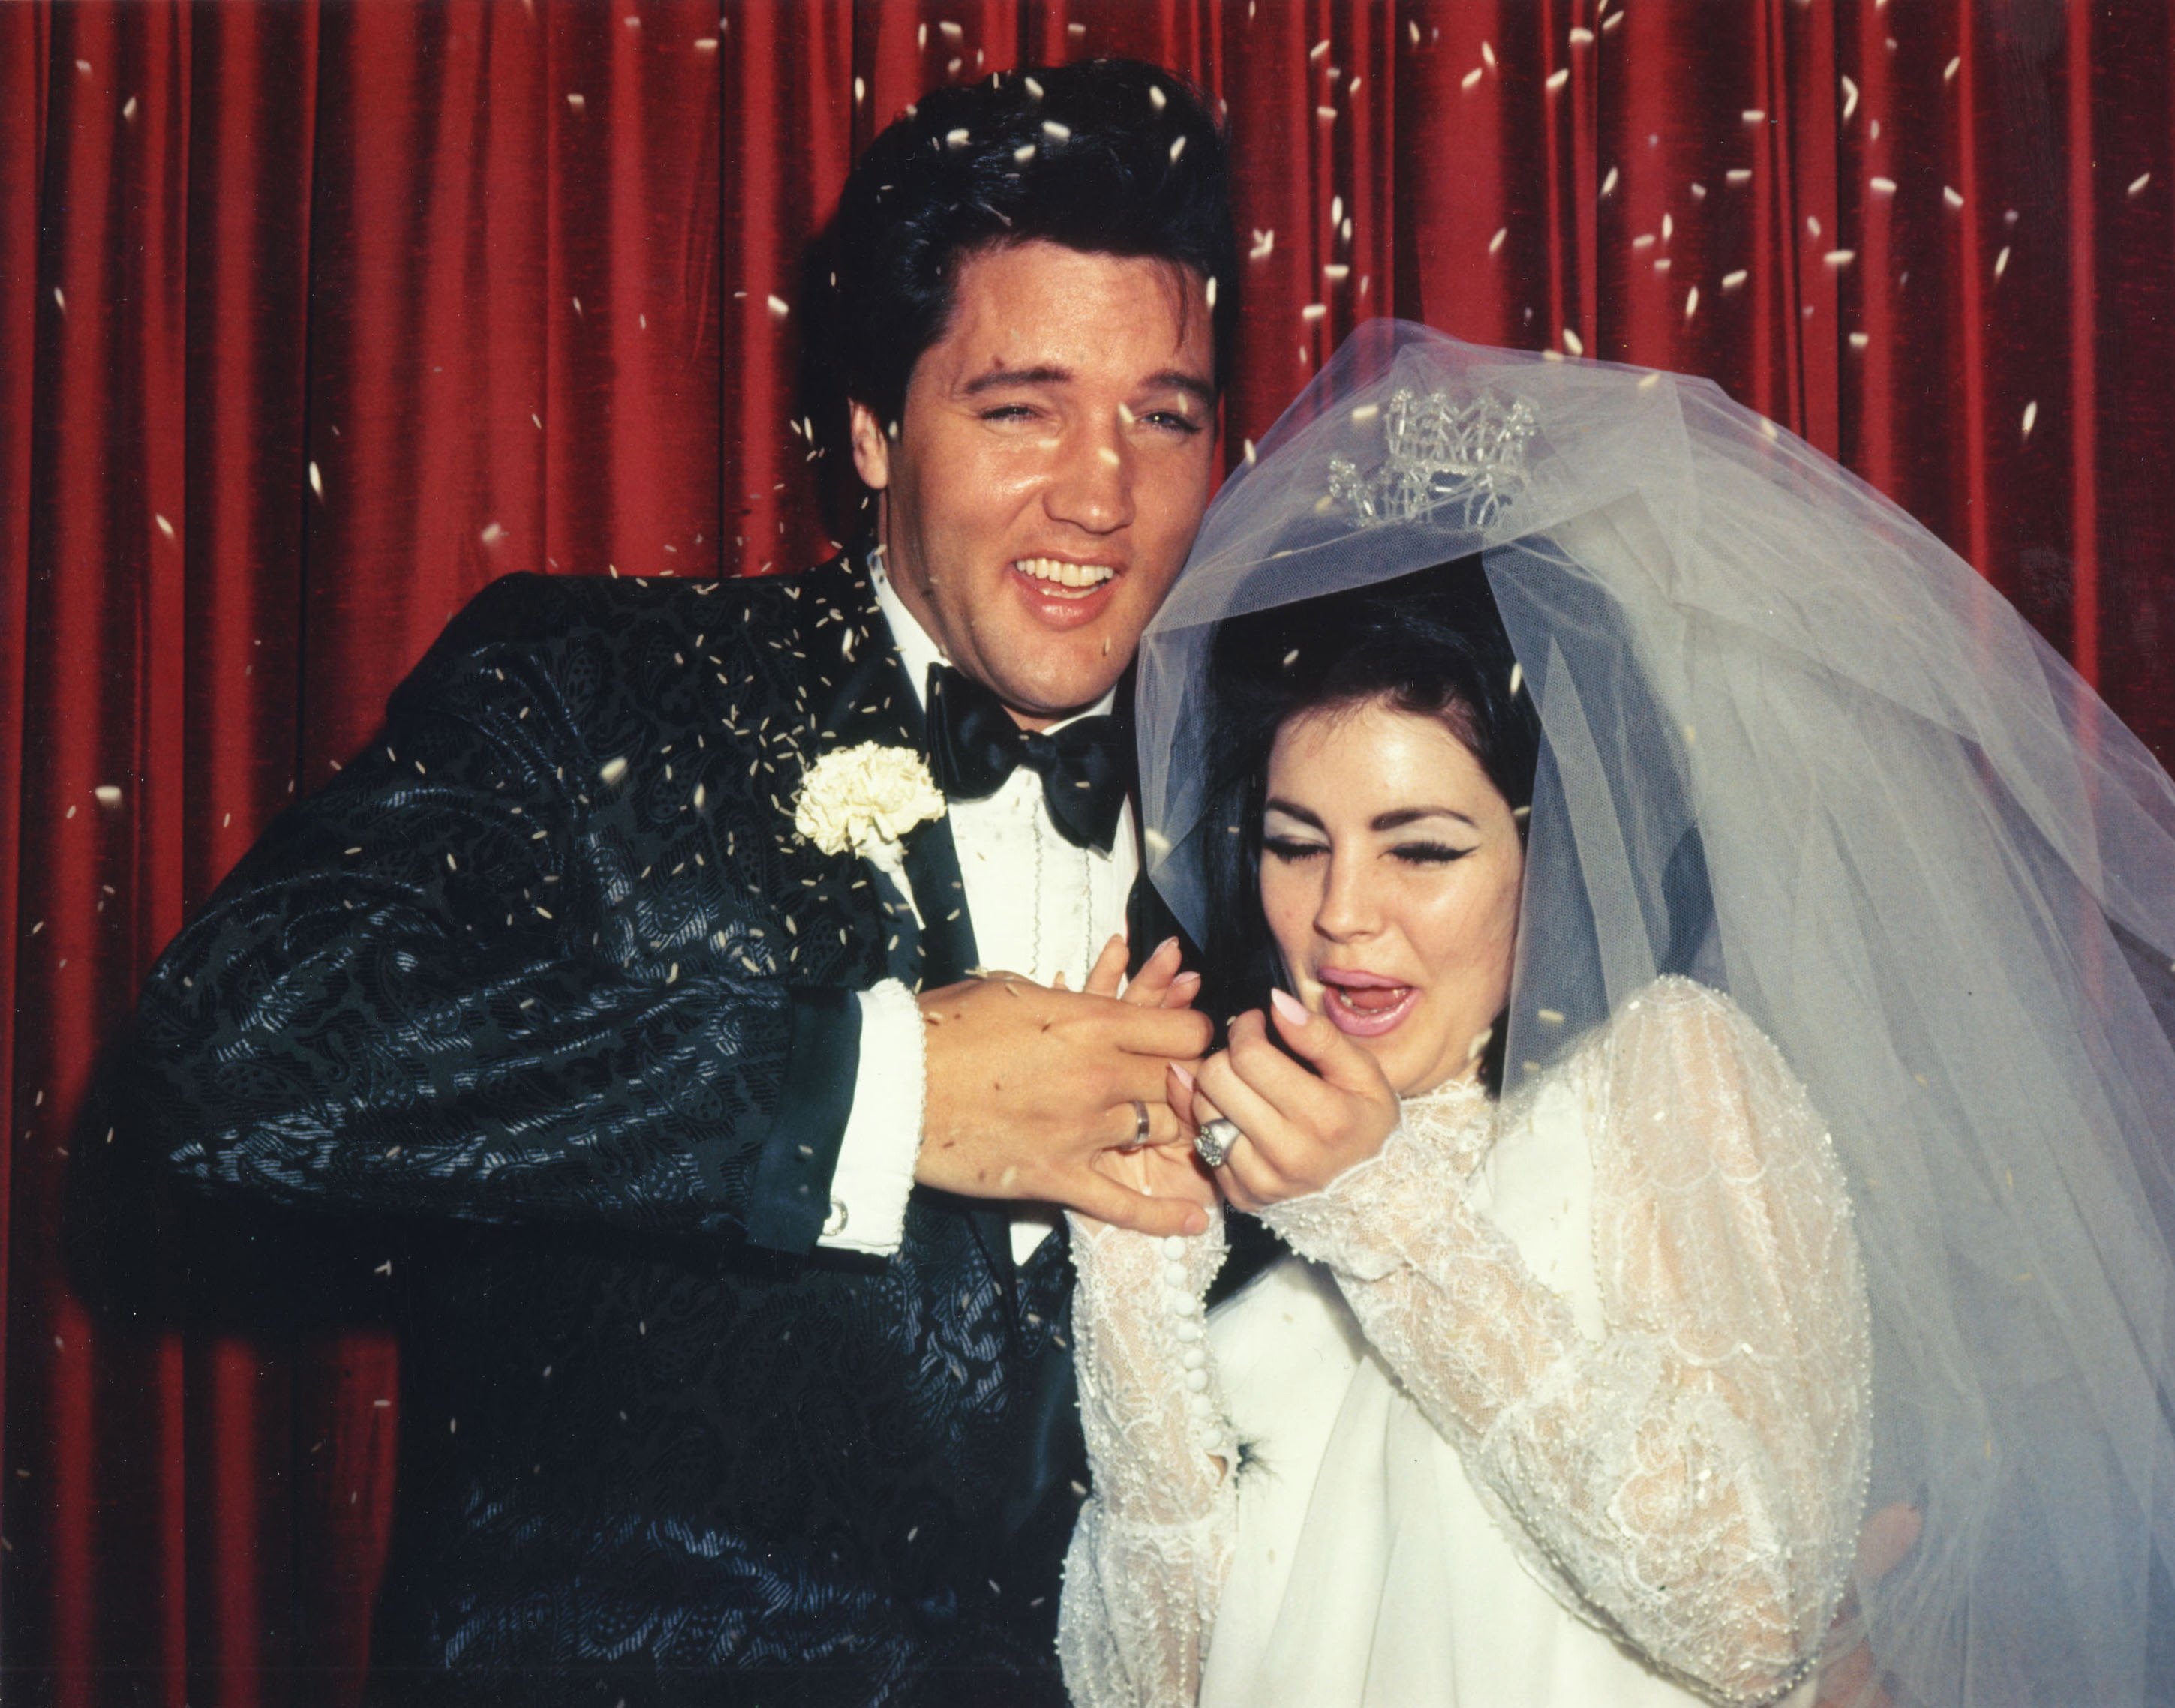 Elvis and Priscilla Presley in front of a red curtain